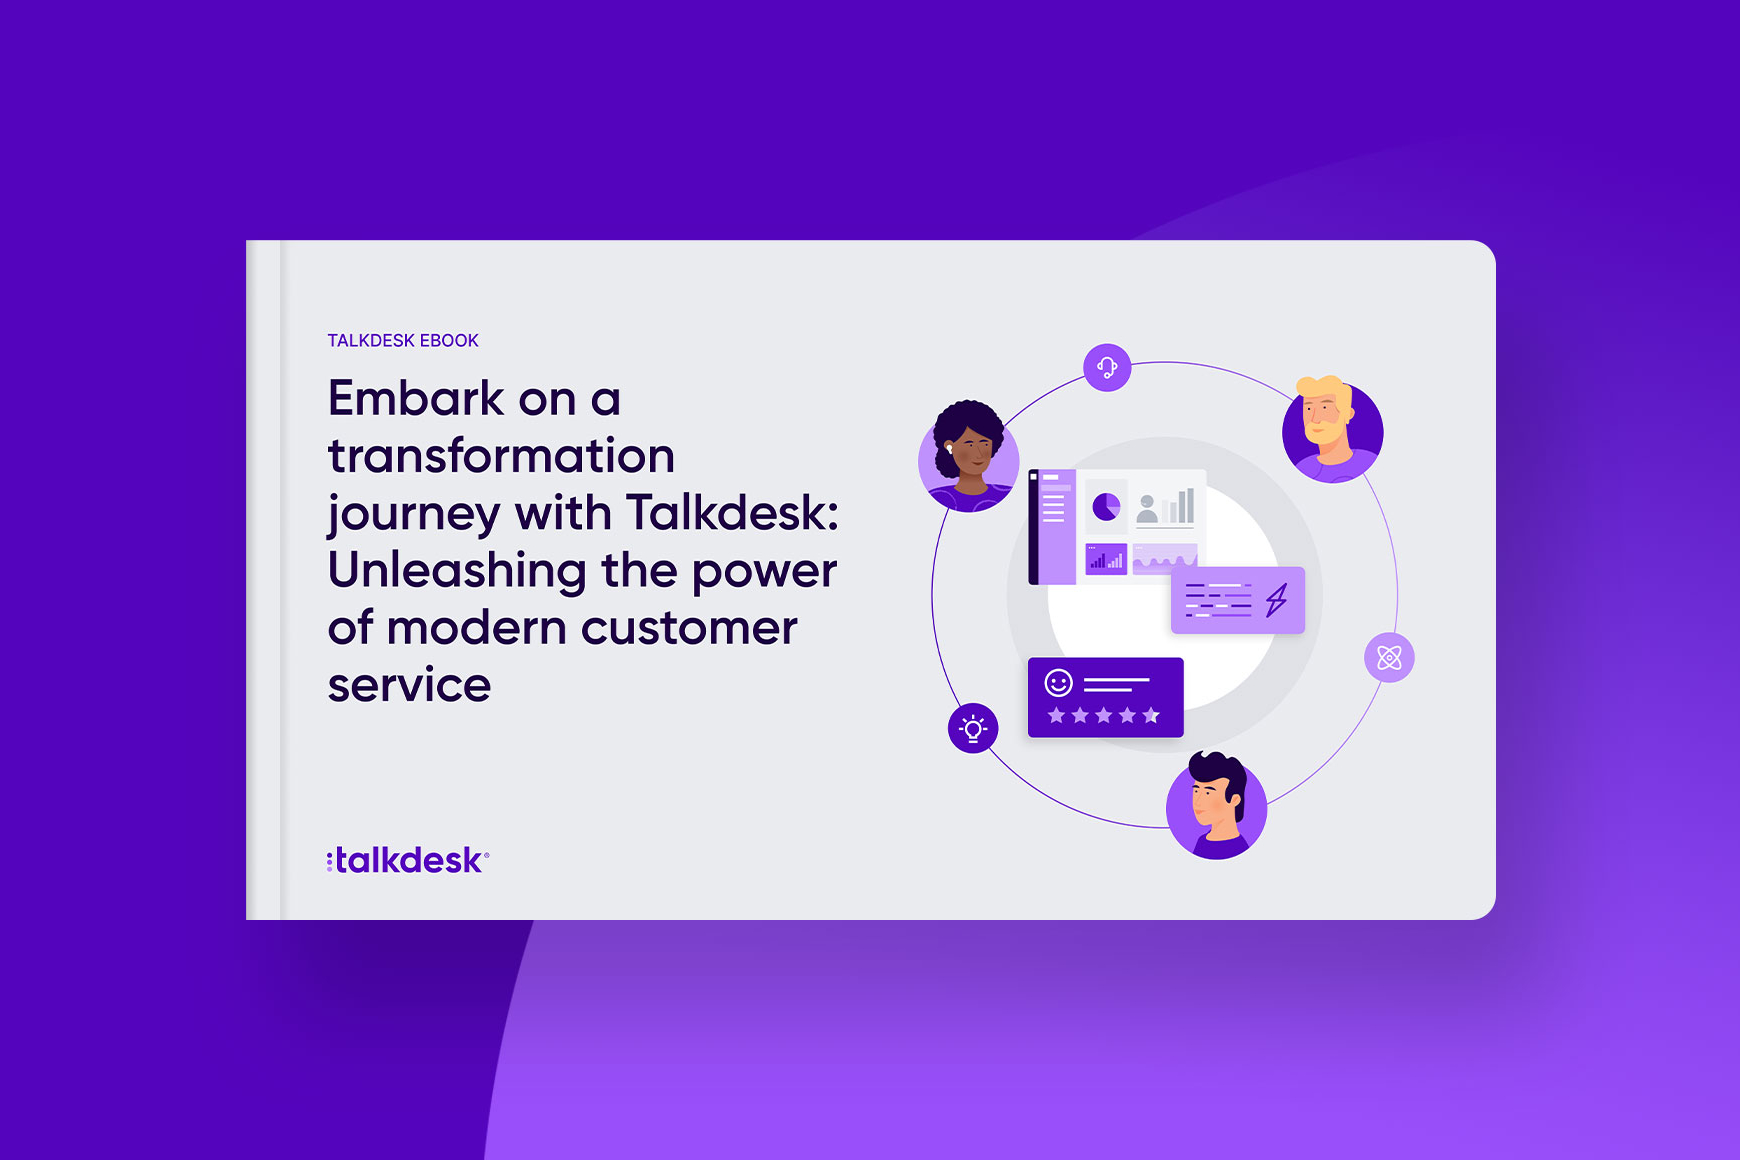 Embark on a transformation journey with Talkdesk: Unleashing the power of modern customer service.